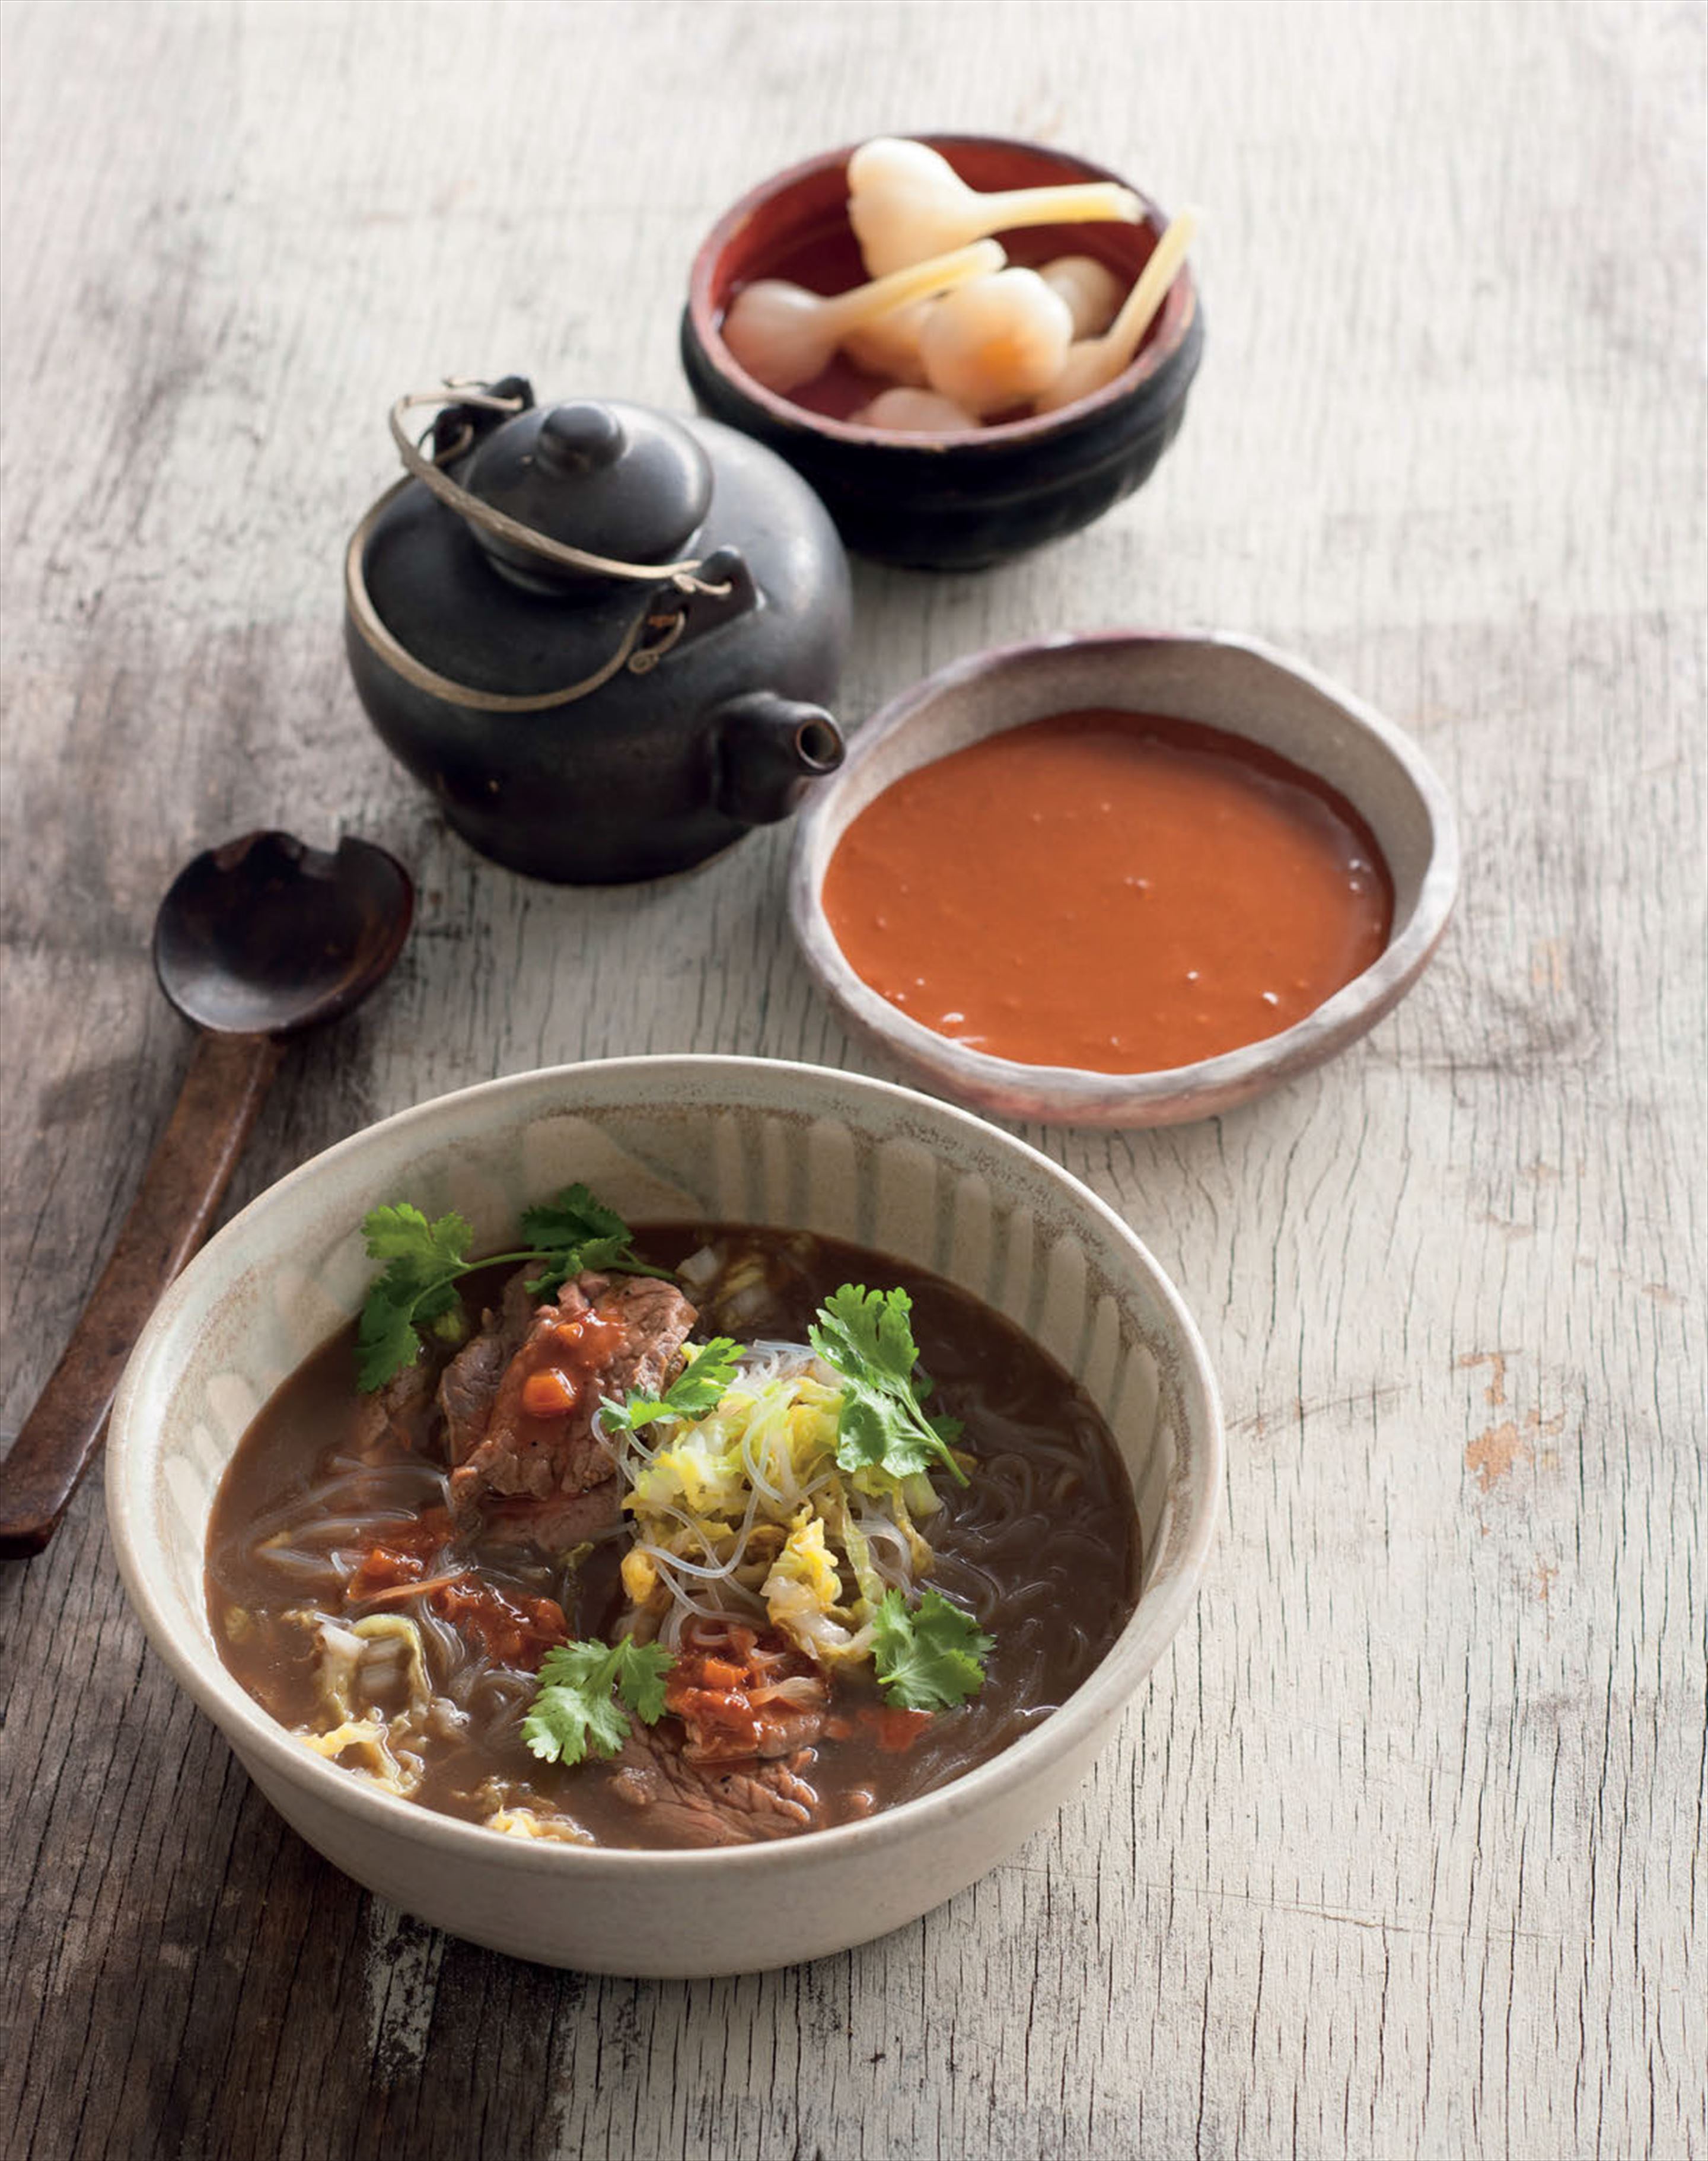 Beef and fermented tofu soup